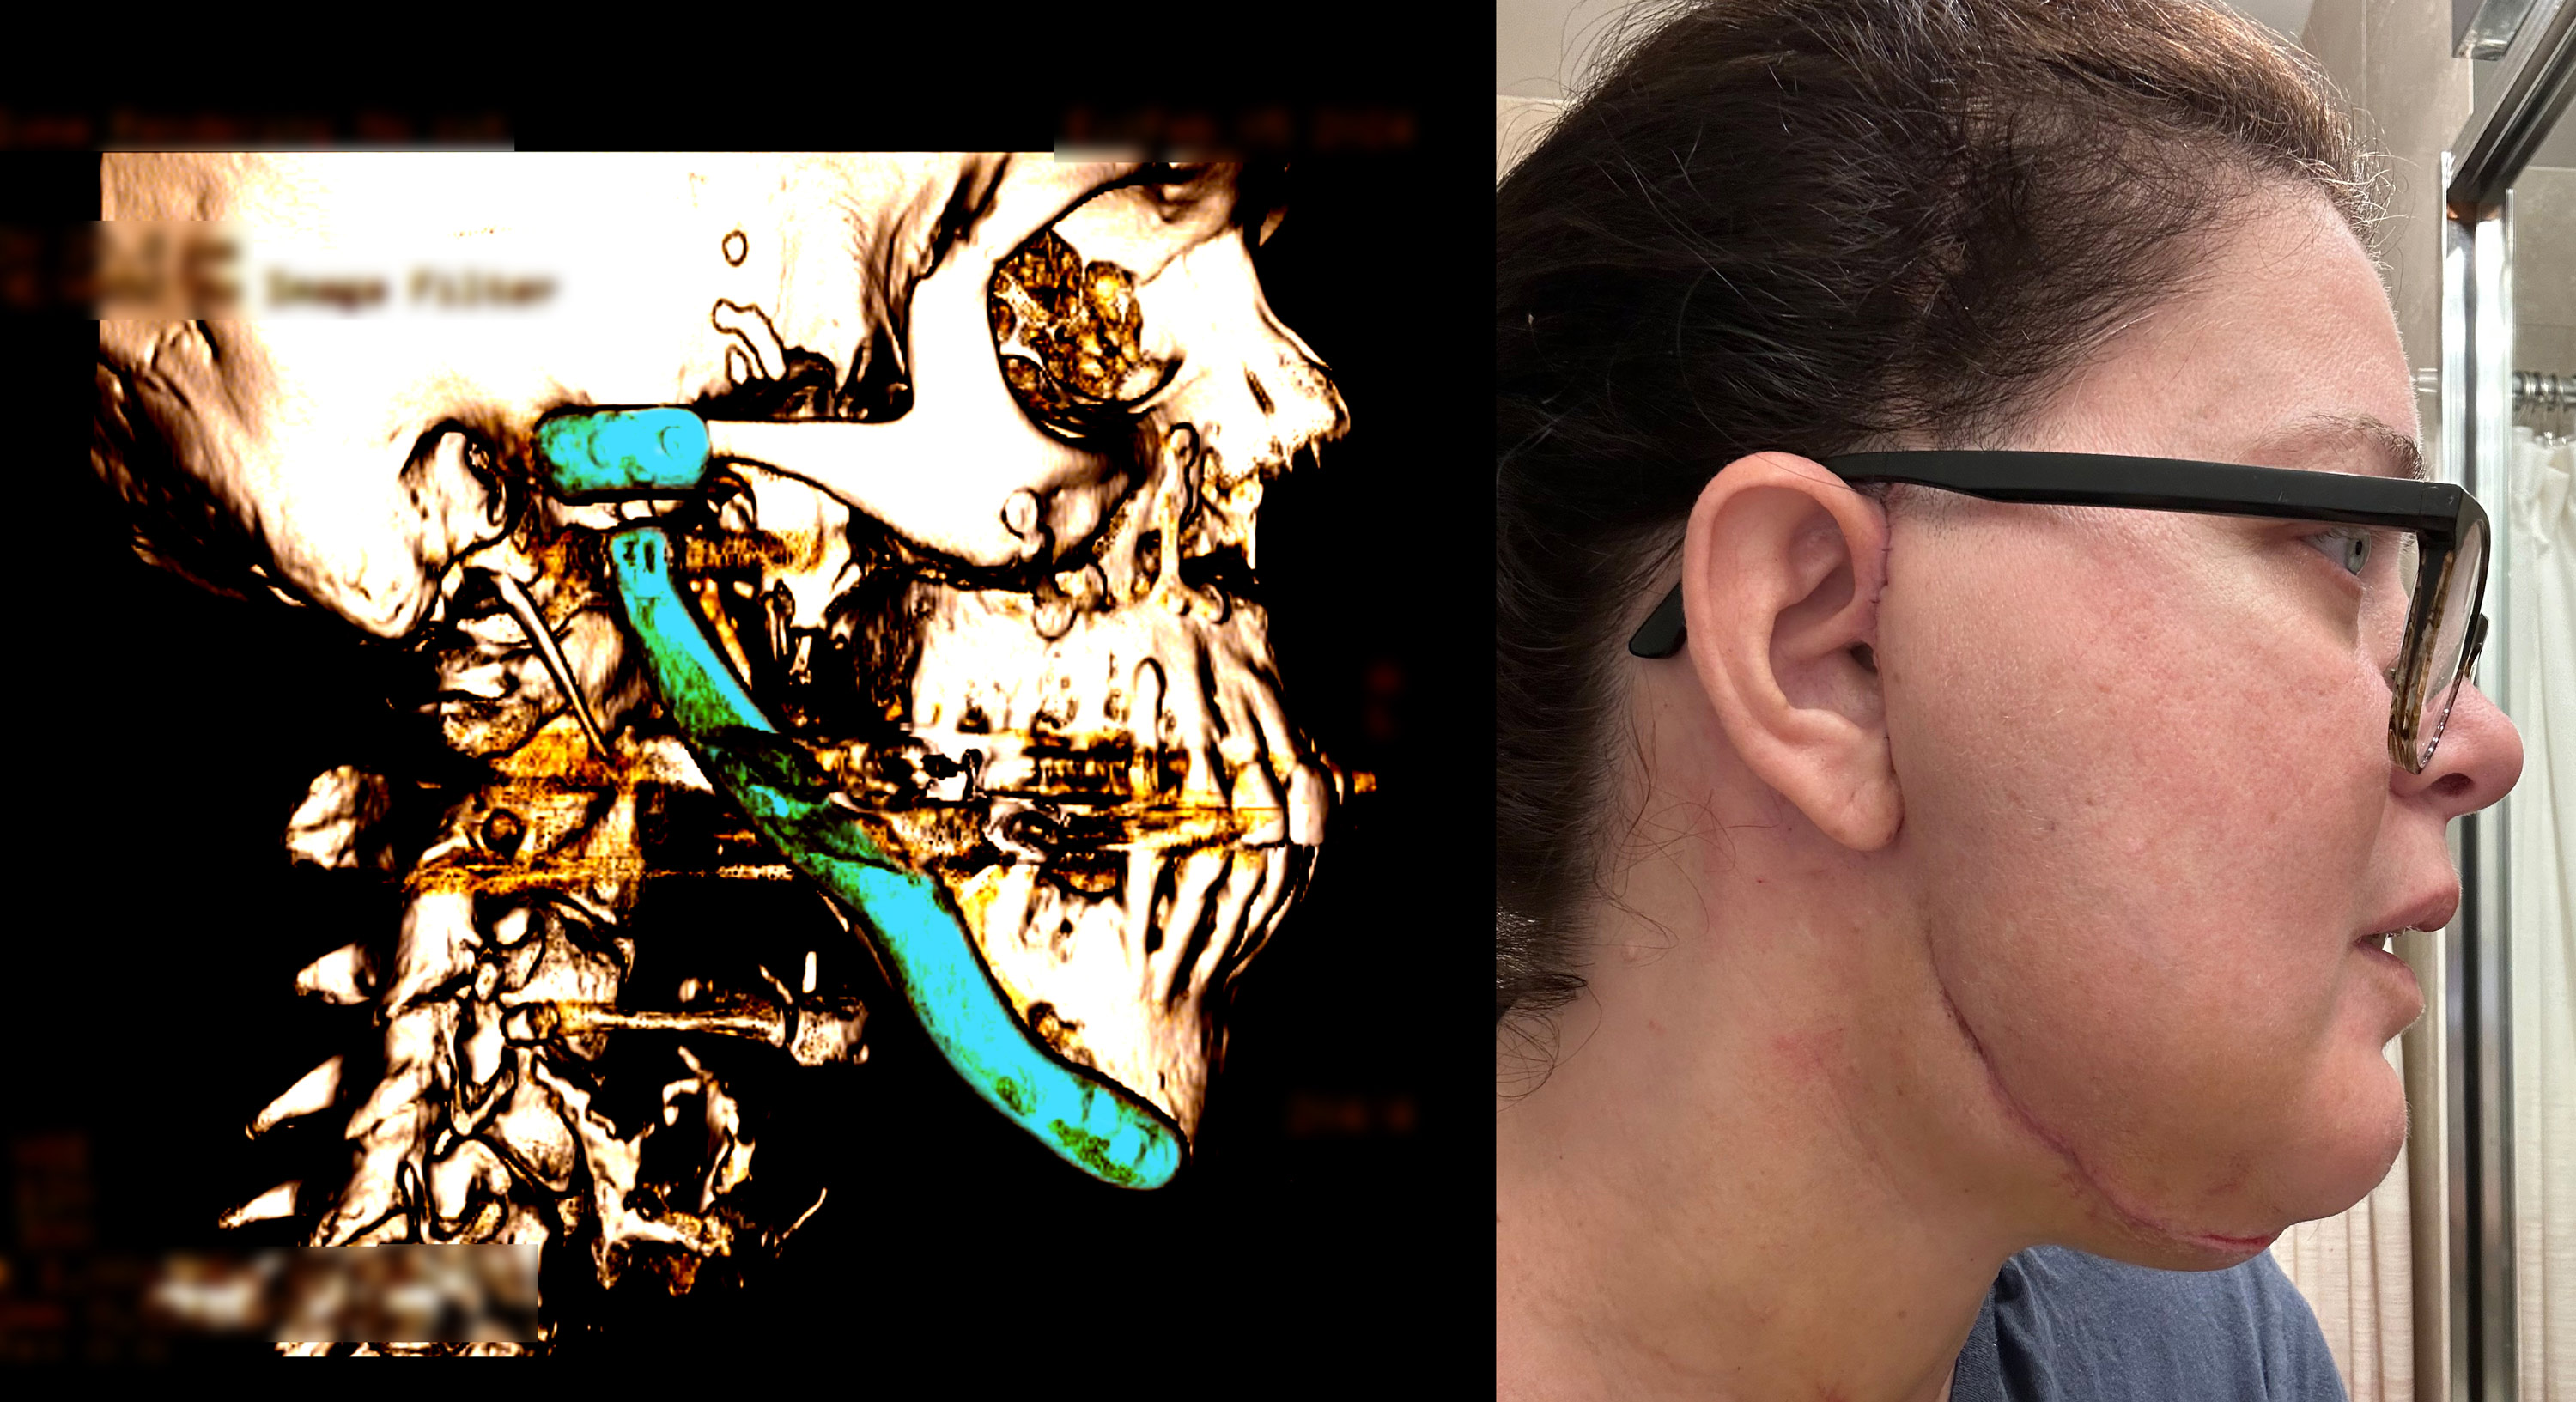 Two images shown next to each other. The left is a scan of a skull in profile with a total jaw replacement implant highlighted. The right is a photo of a woman's face in profile showing a scar along the side of her face.